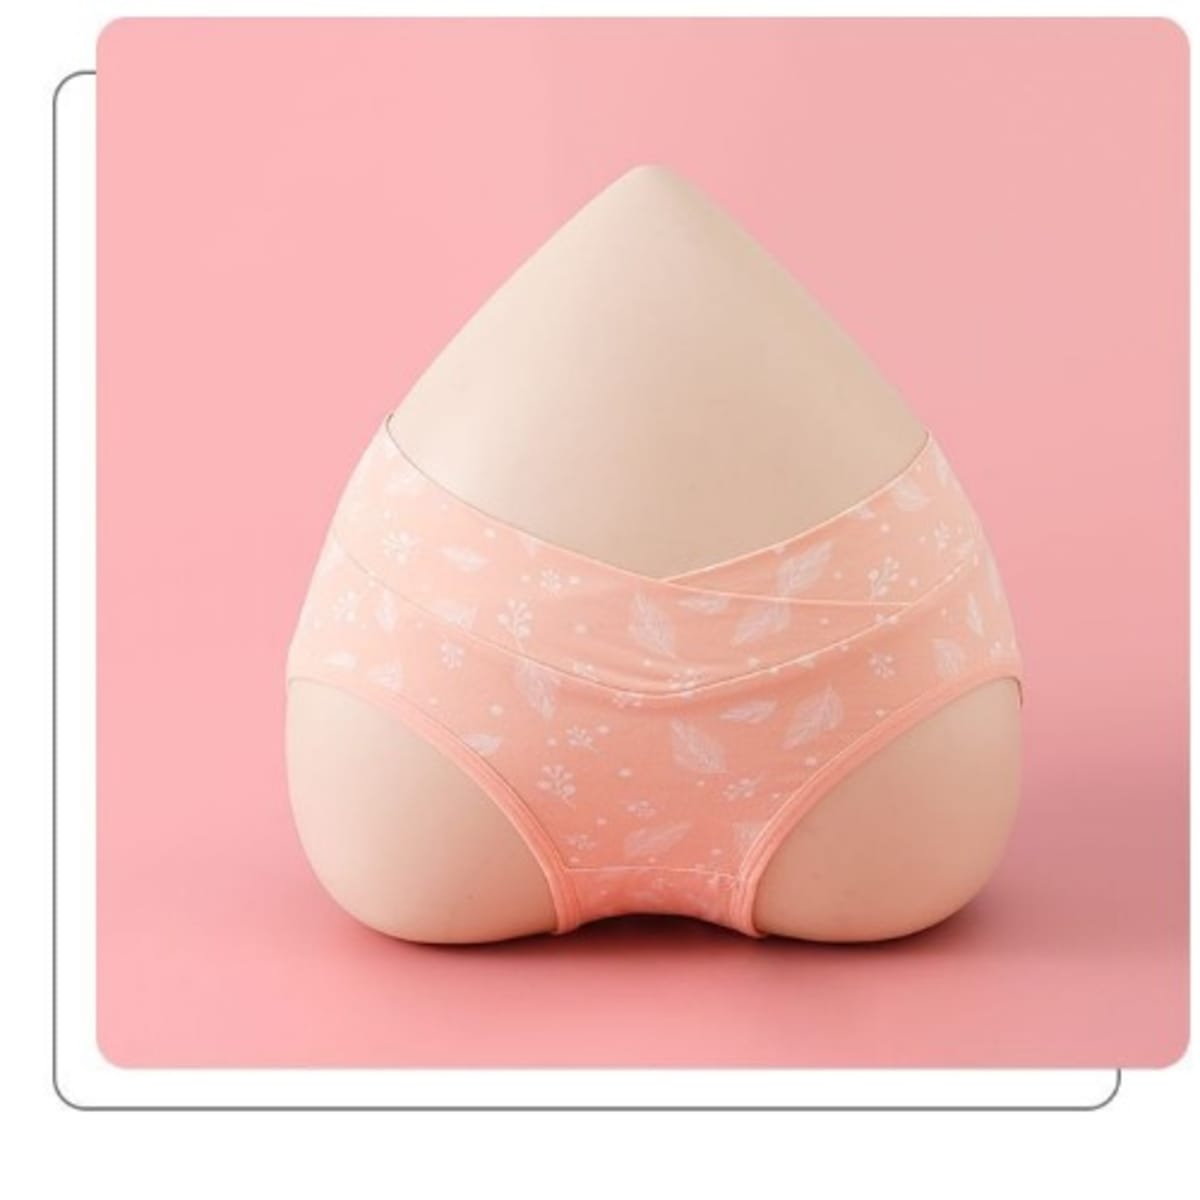 Under the Belly Pregnancy Maternity Panties 3 Pieces